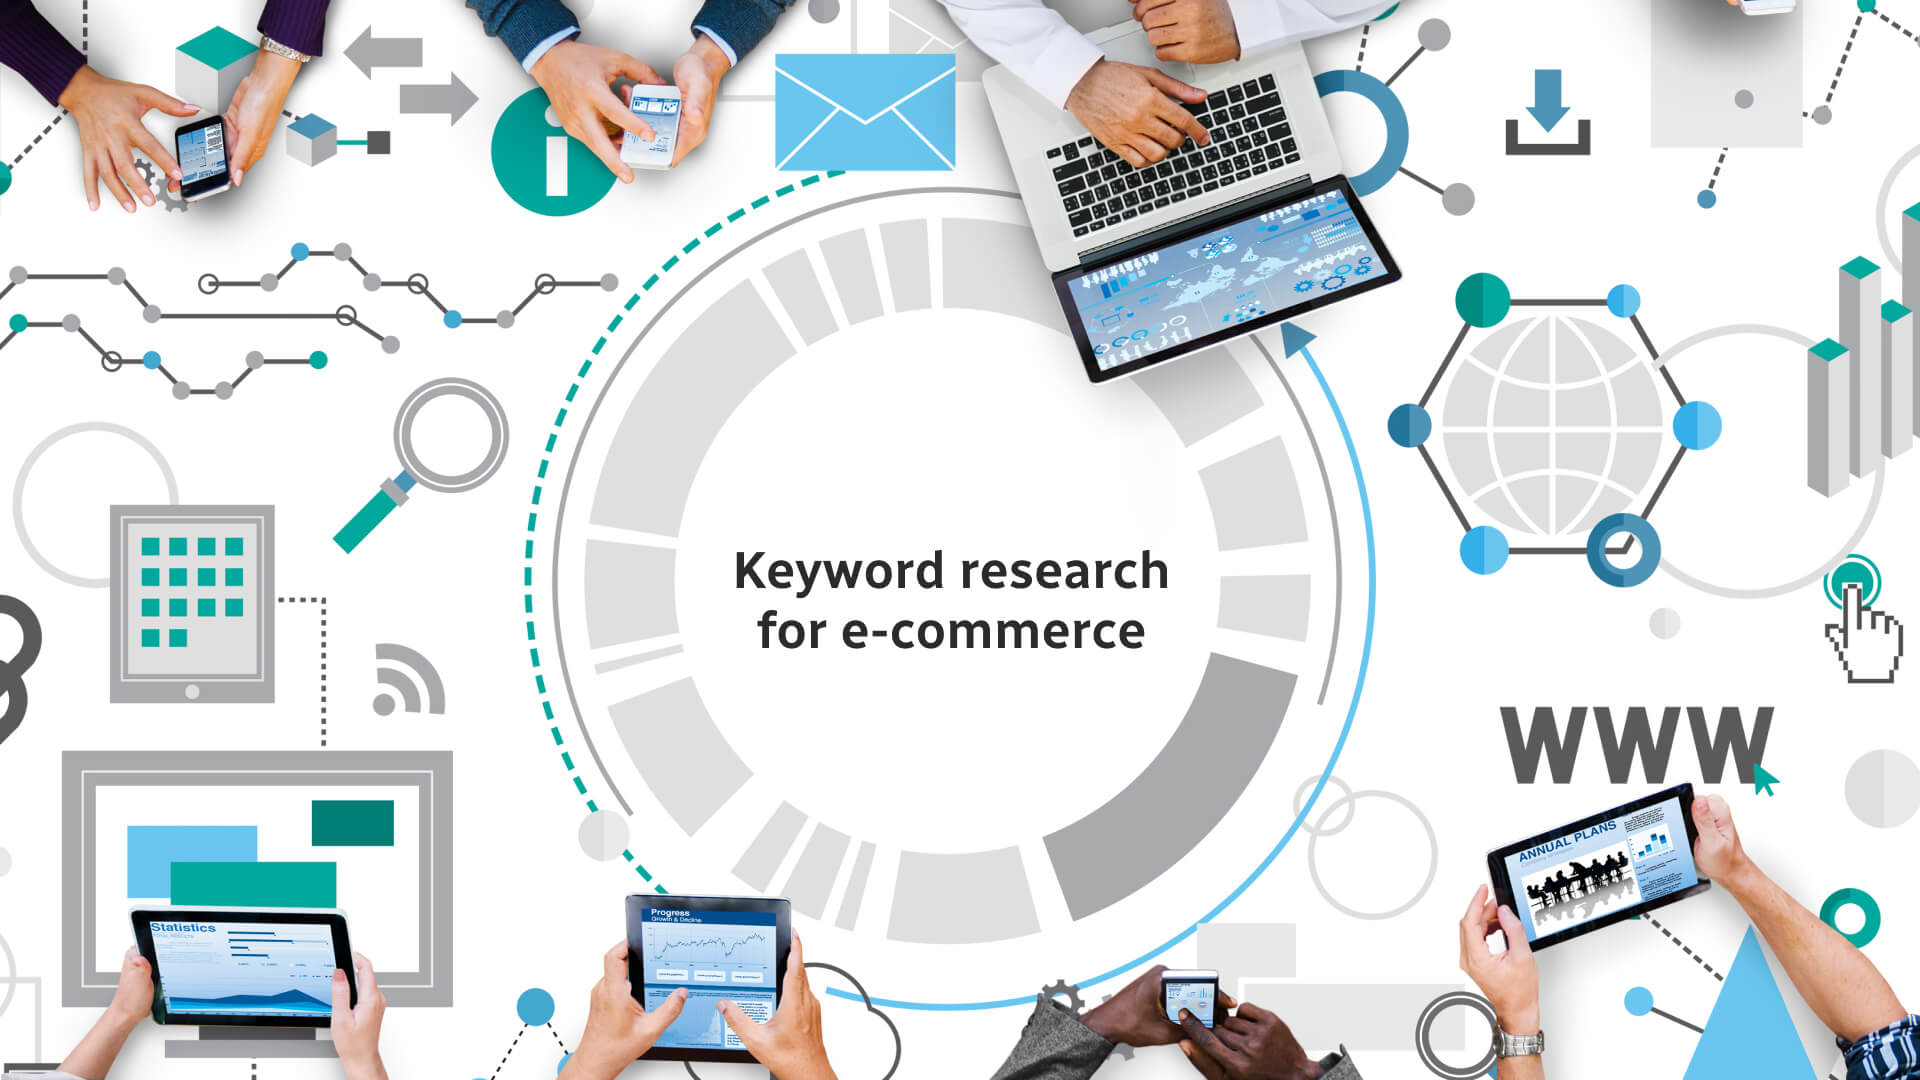 Keyword research for e-commerce